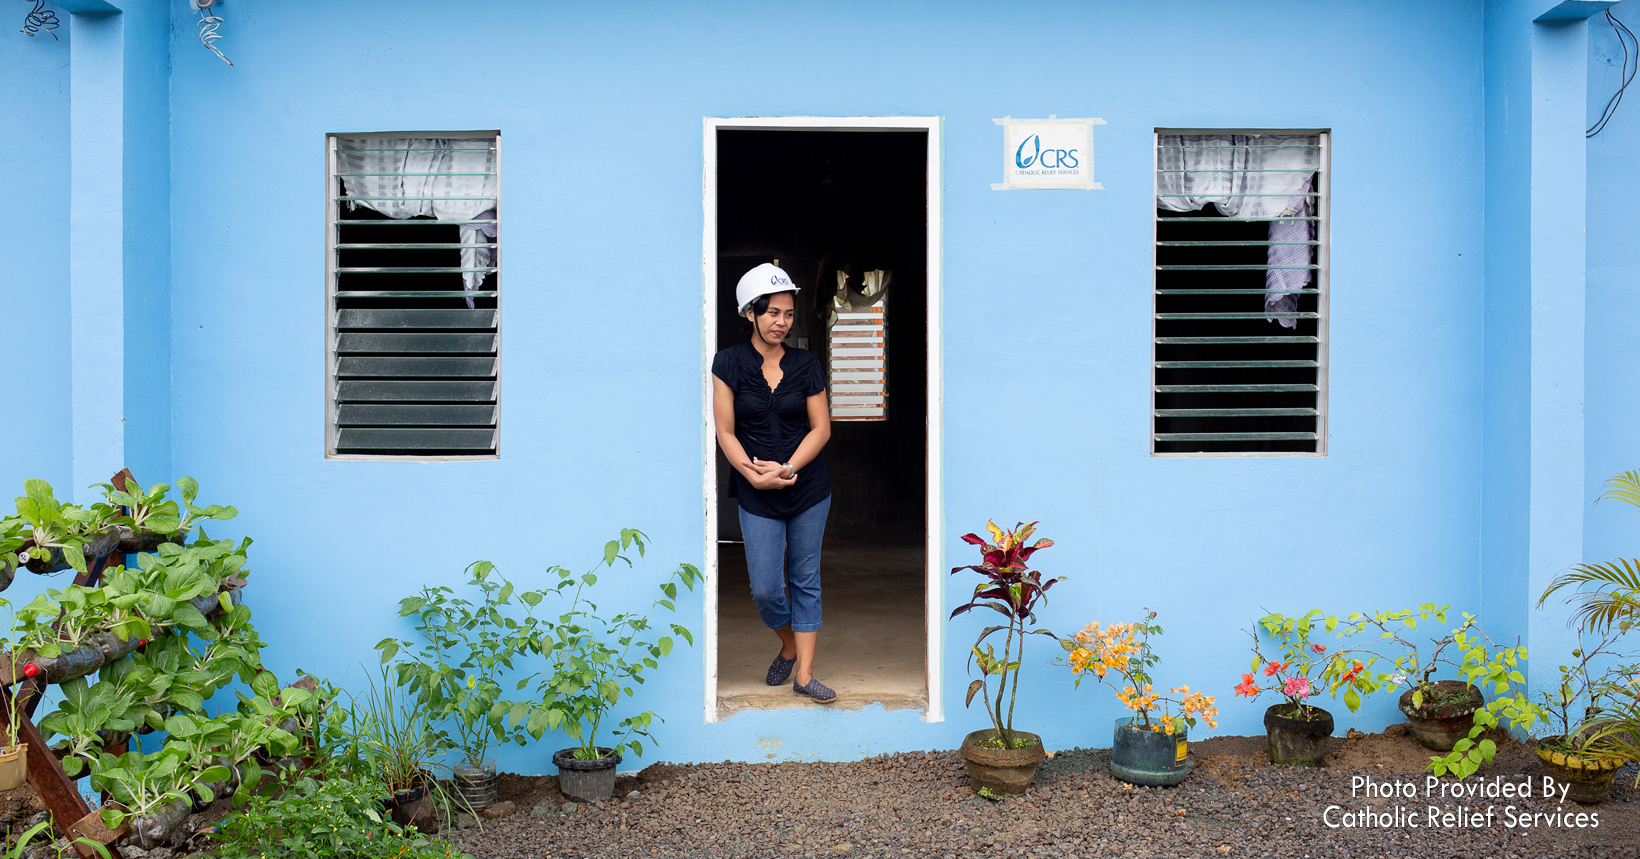 Girlita Ascalona is seeing her new home for the first time. The house is resilient towards earthquakes, rainwater, and typhoons. Her home has an indoor toilet, full electrical wiring and can hold a second story if she wants to build one.